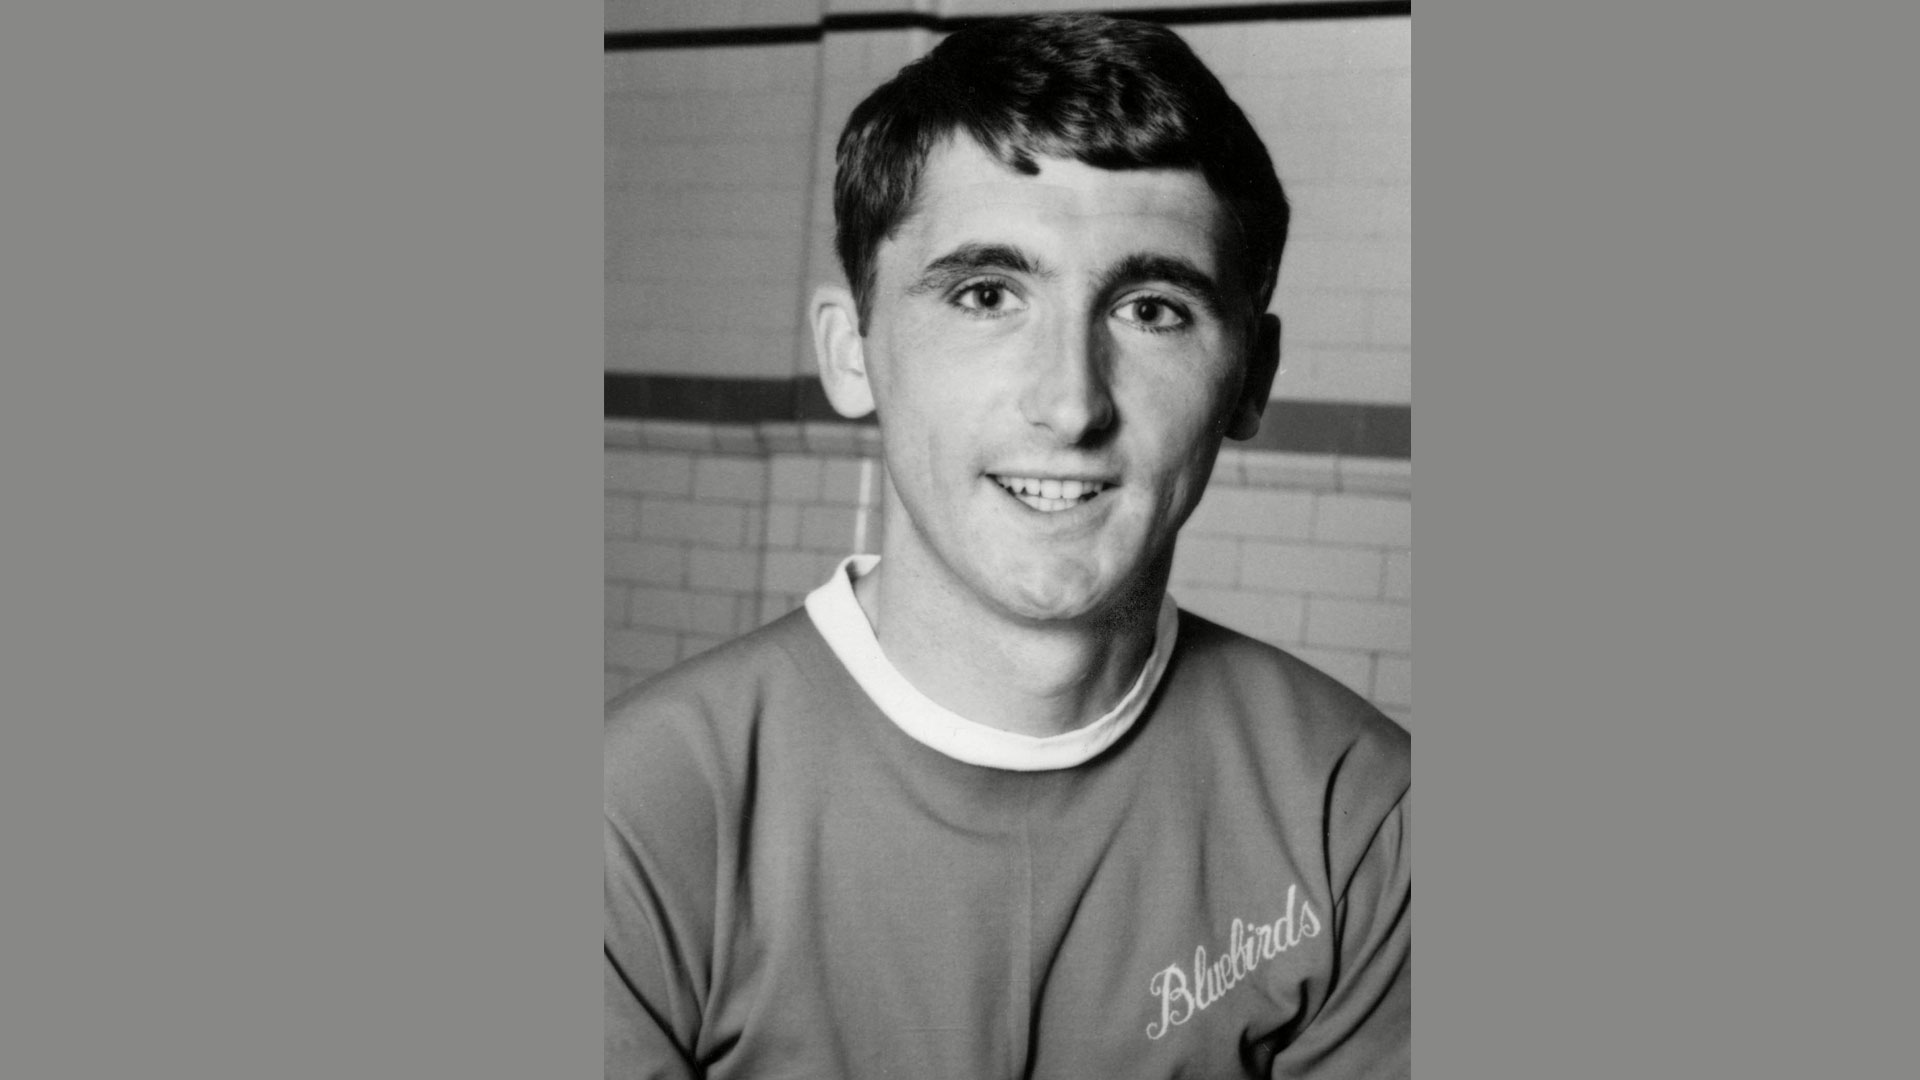 Peter King during his early days with the Bluebirds...